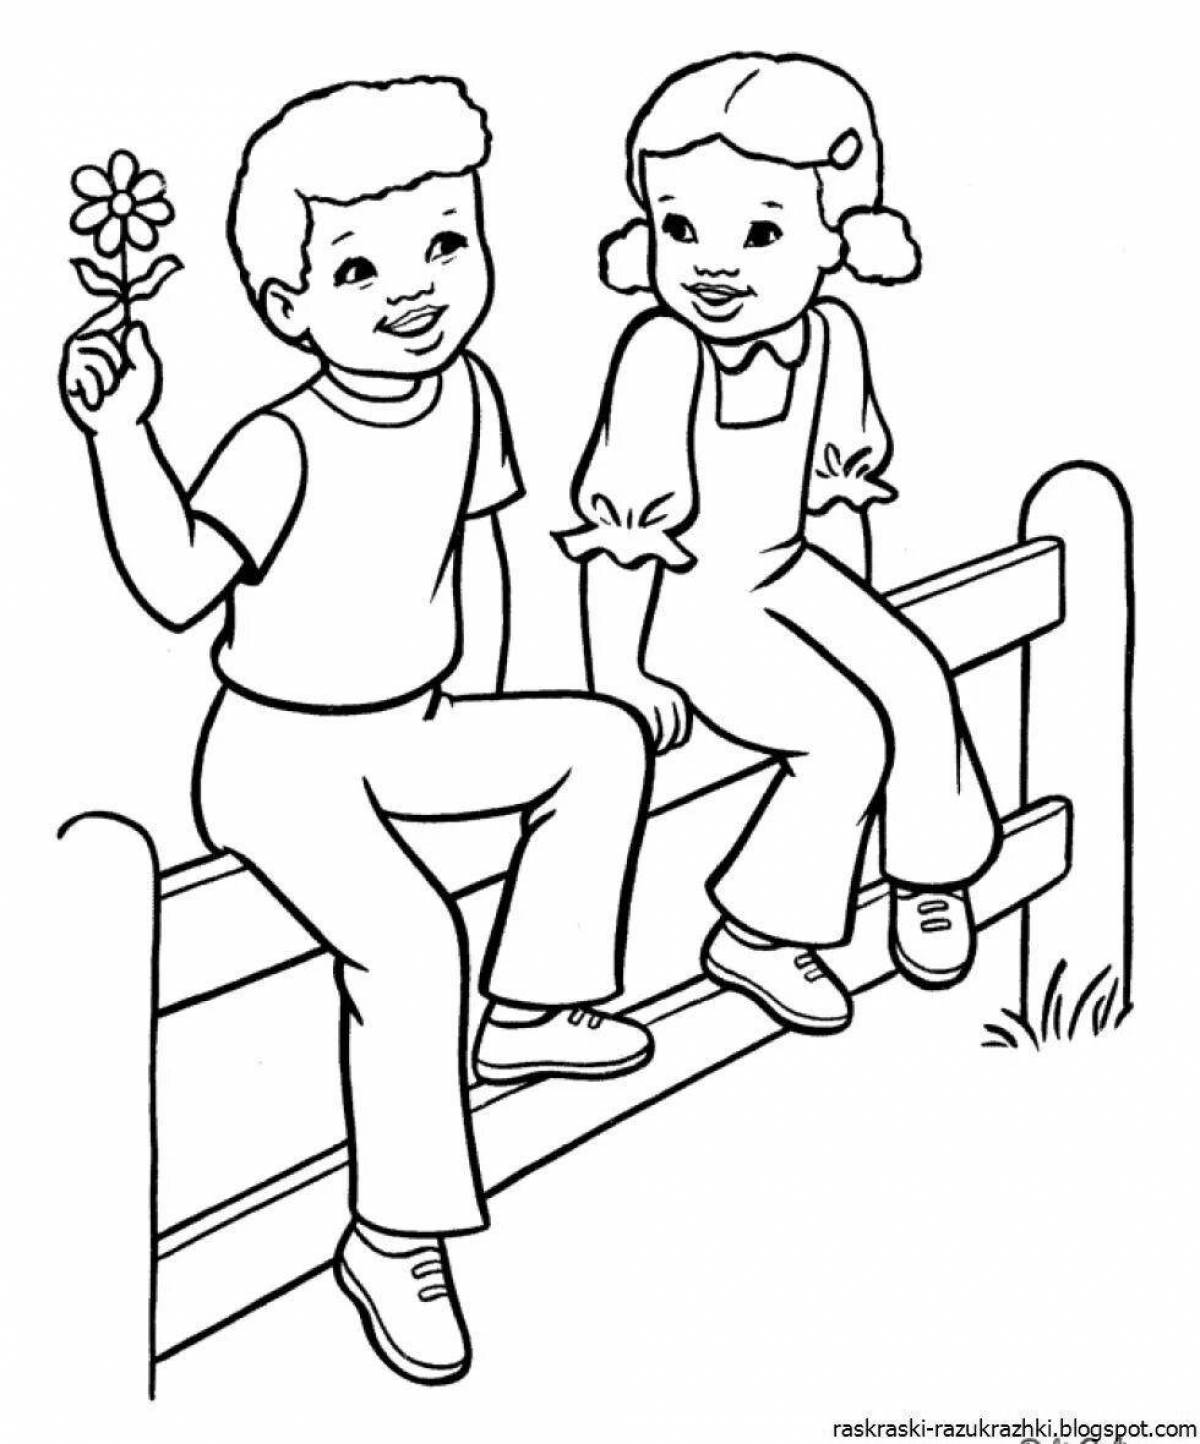 Exciting me and my friends coloring book